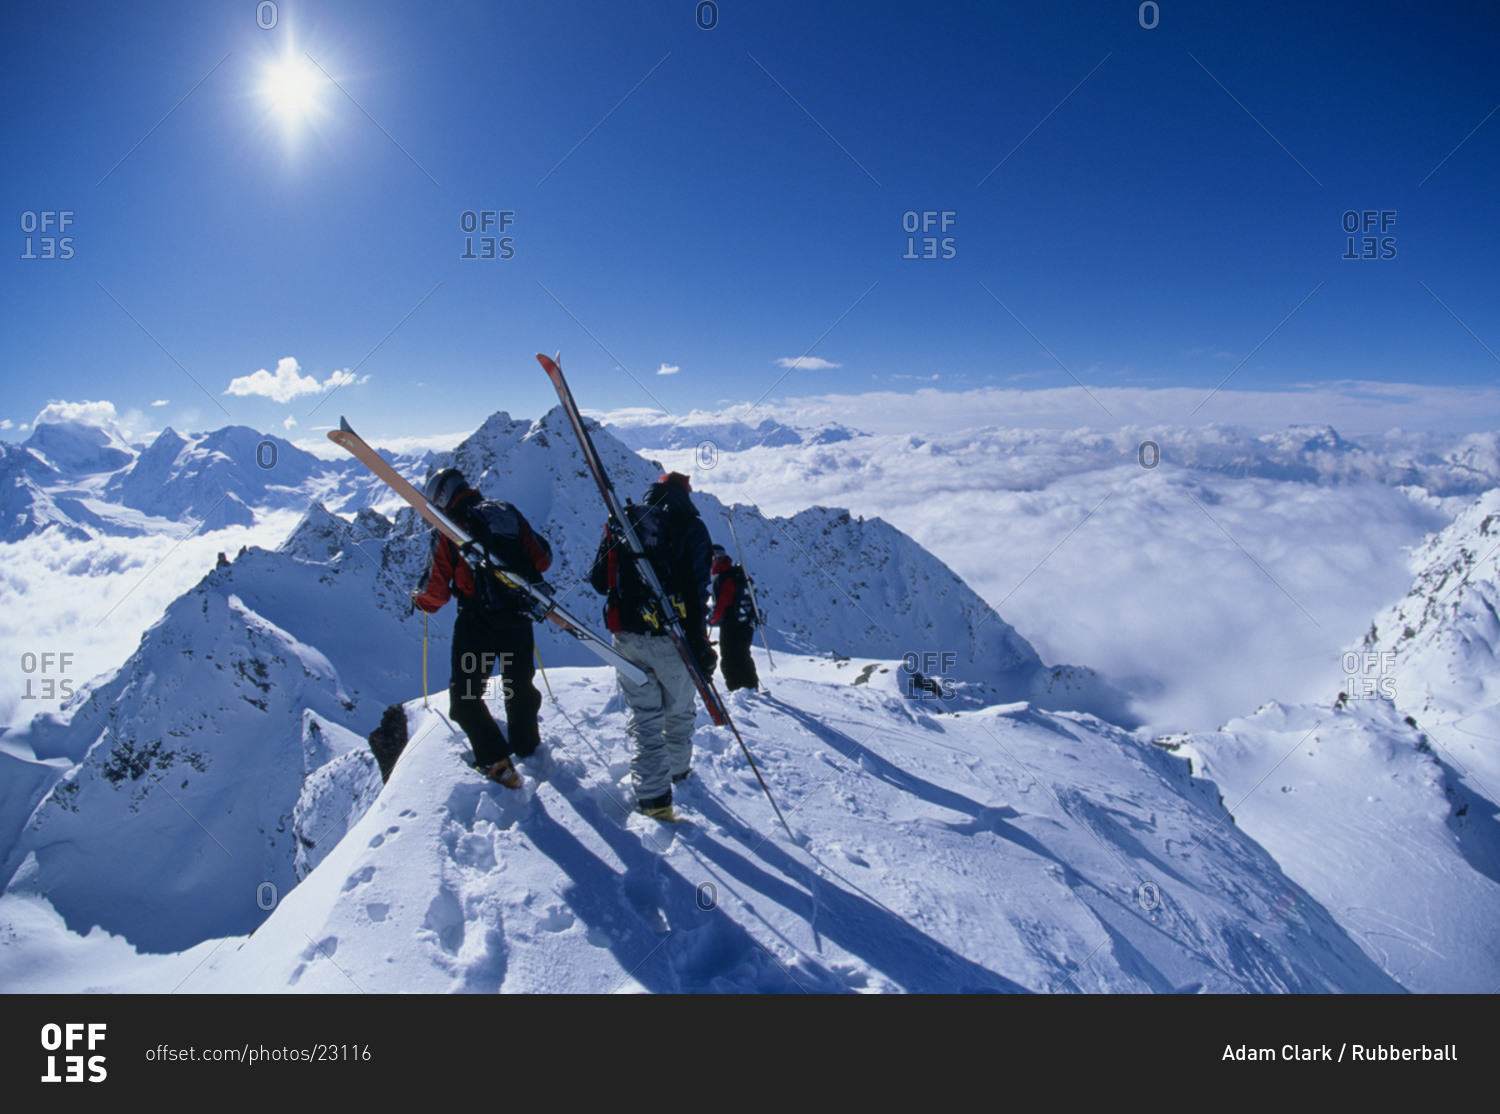 Two people with skis on mountain in winter